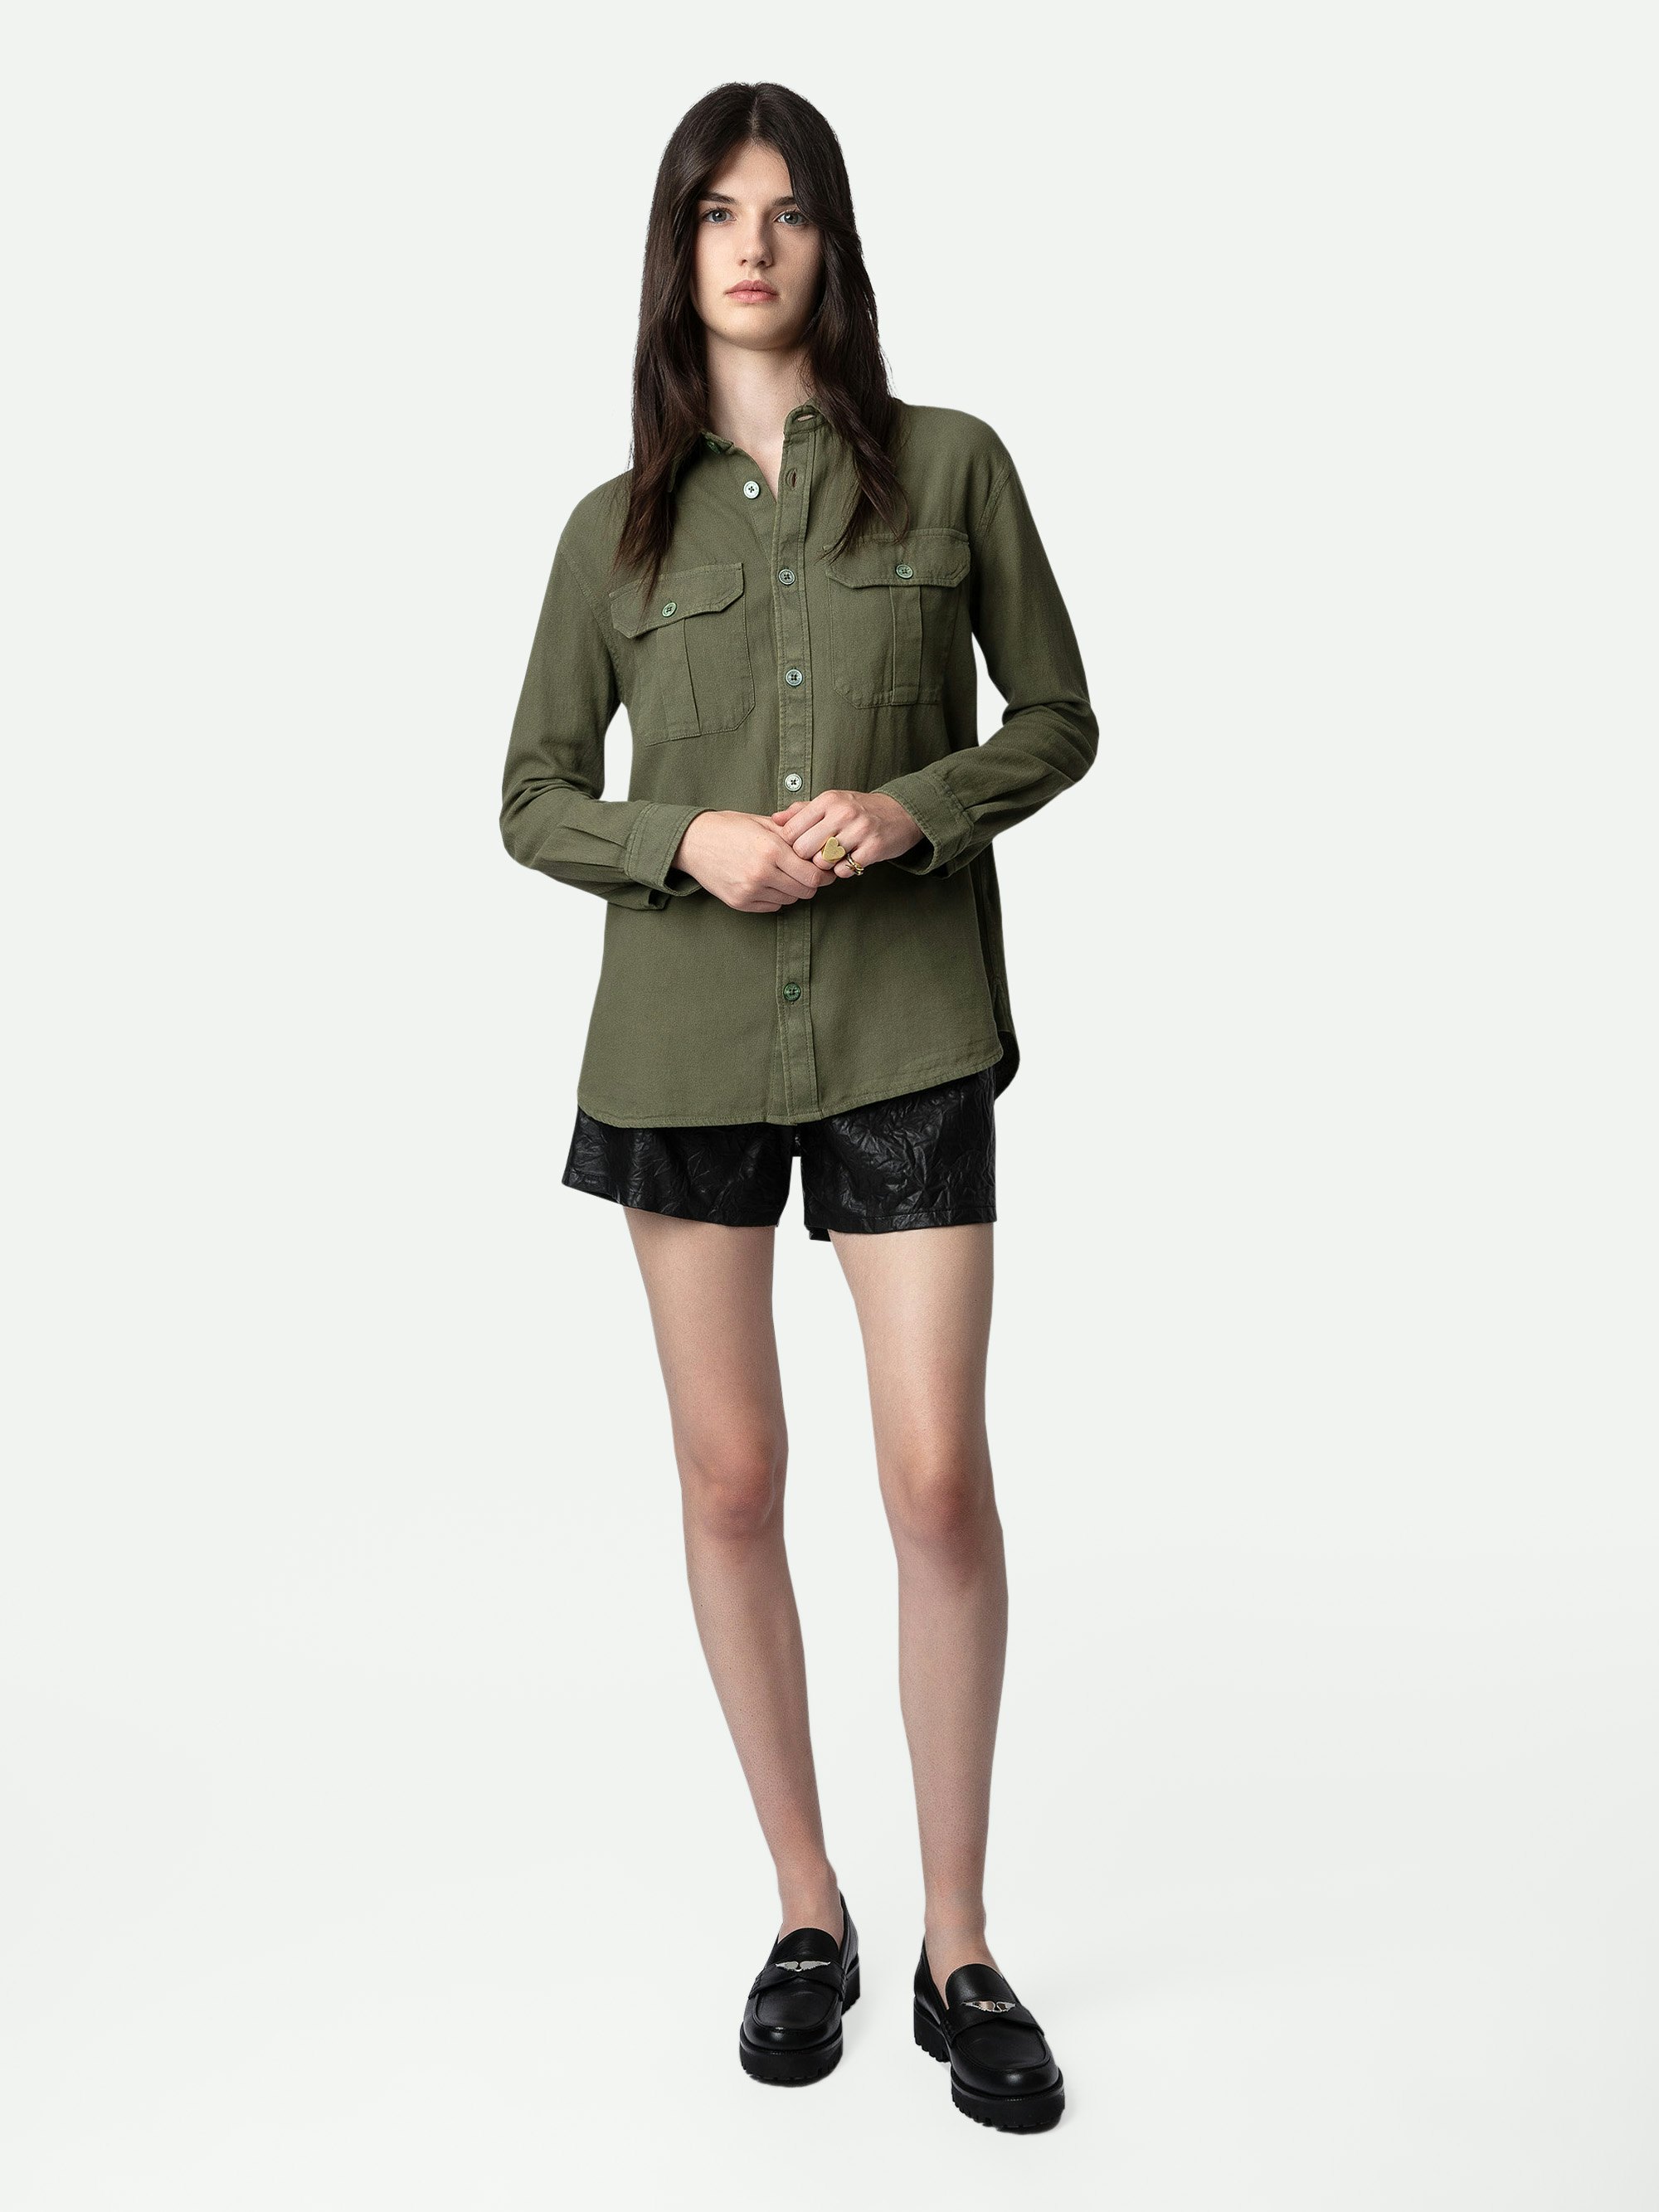 Teros Shirt - Green cotton shirt with button fastening, pockets and ZV embroidery.